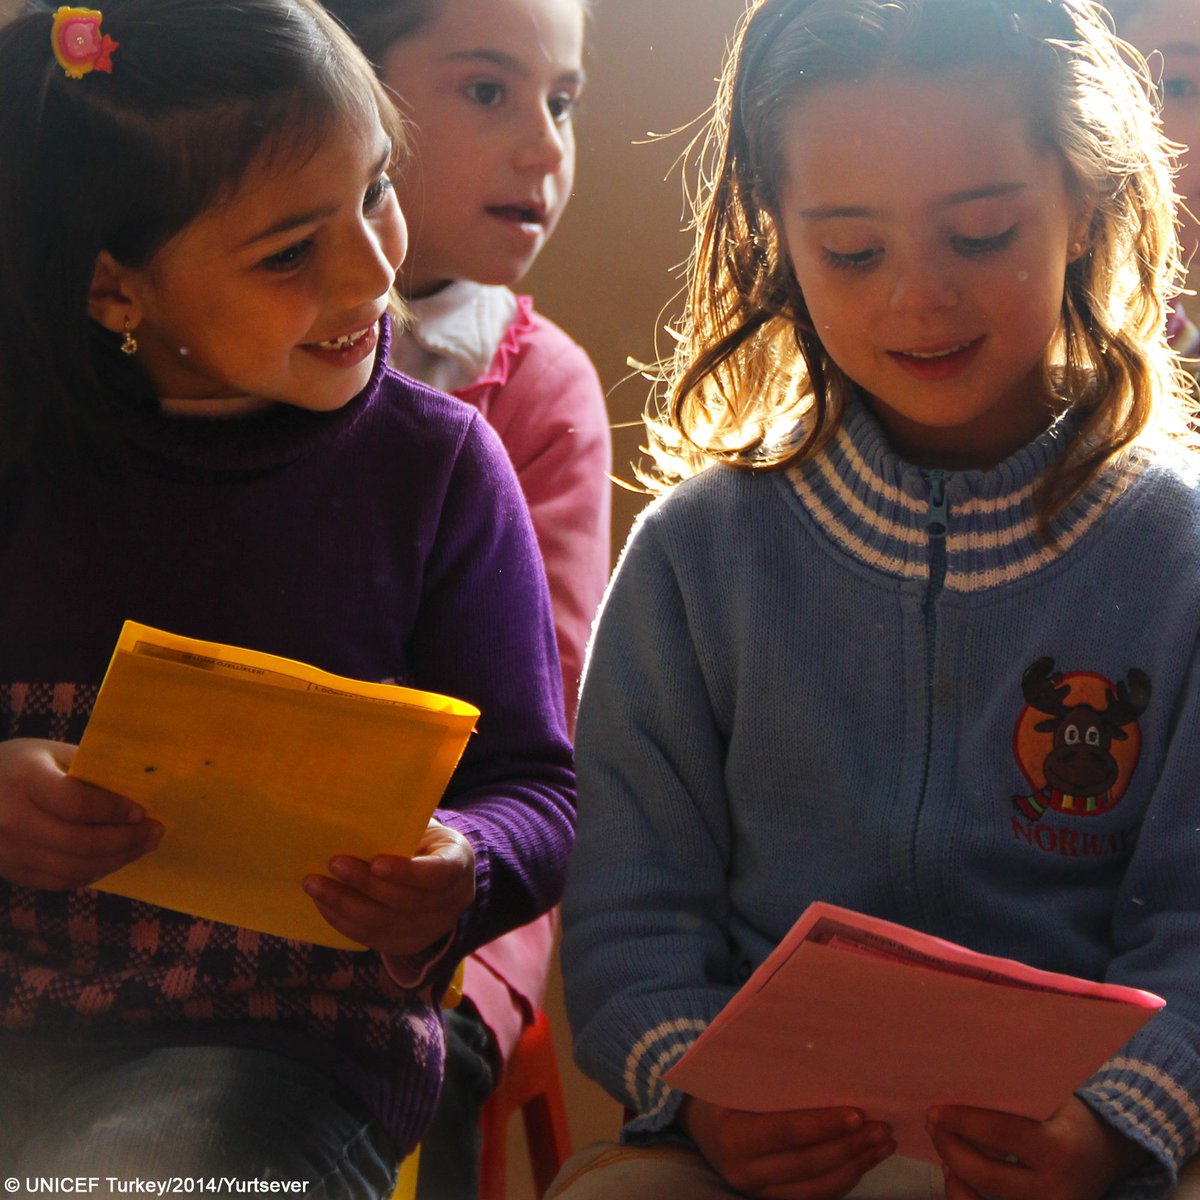 RT @UNICEF: Every child has the right to quality education. RT if you agree! Via @unicefturk https://t.co/Vjii0O8Ccp